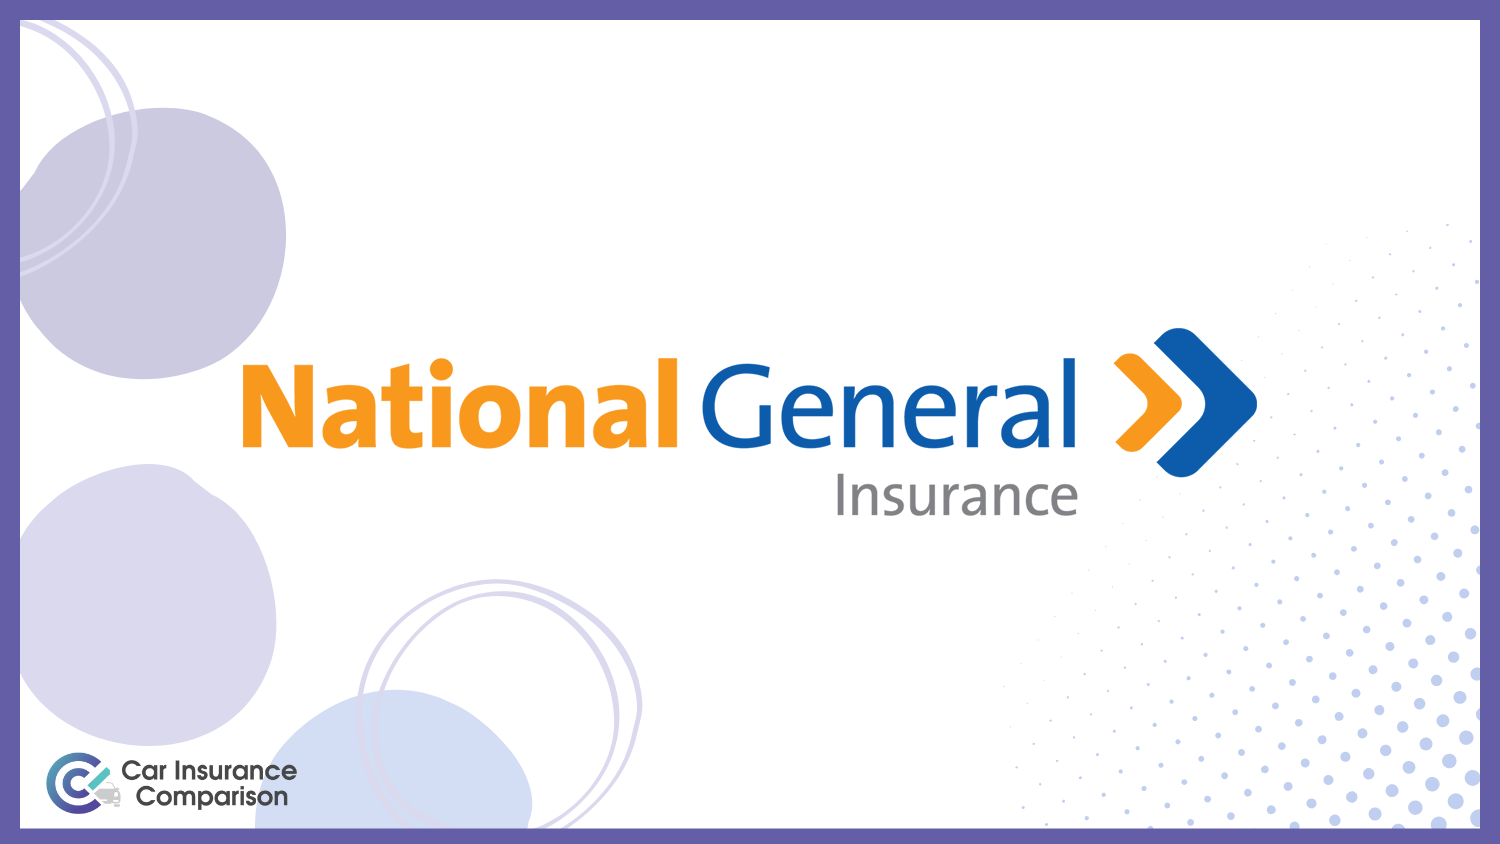 National General: Compare Best Car Insurance Companies That Accept a Suspended License